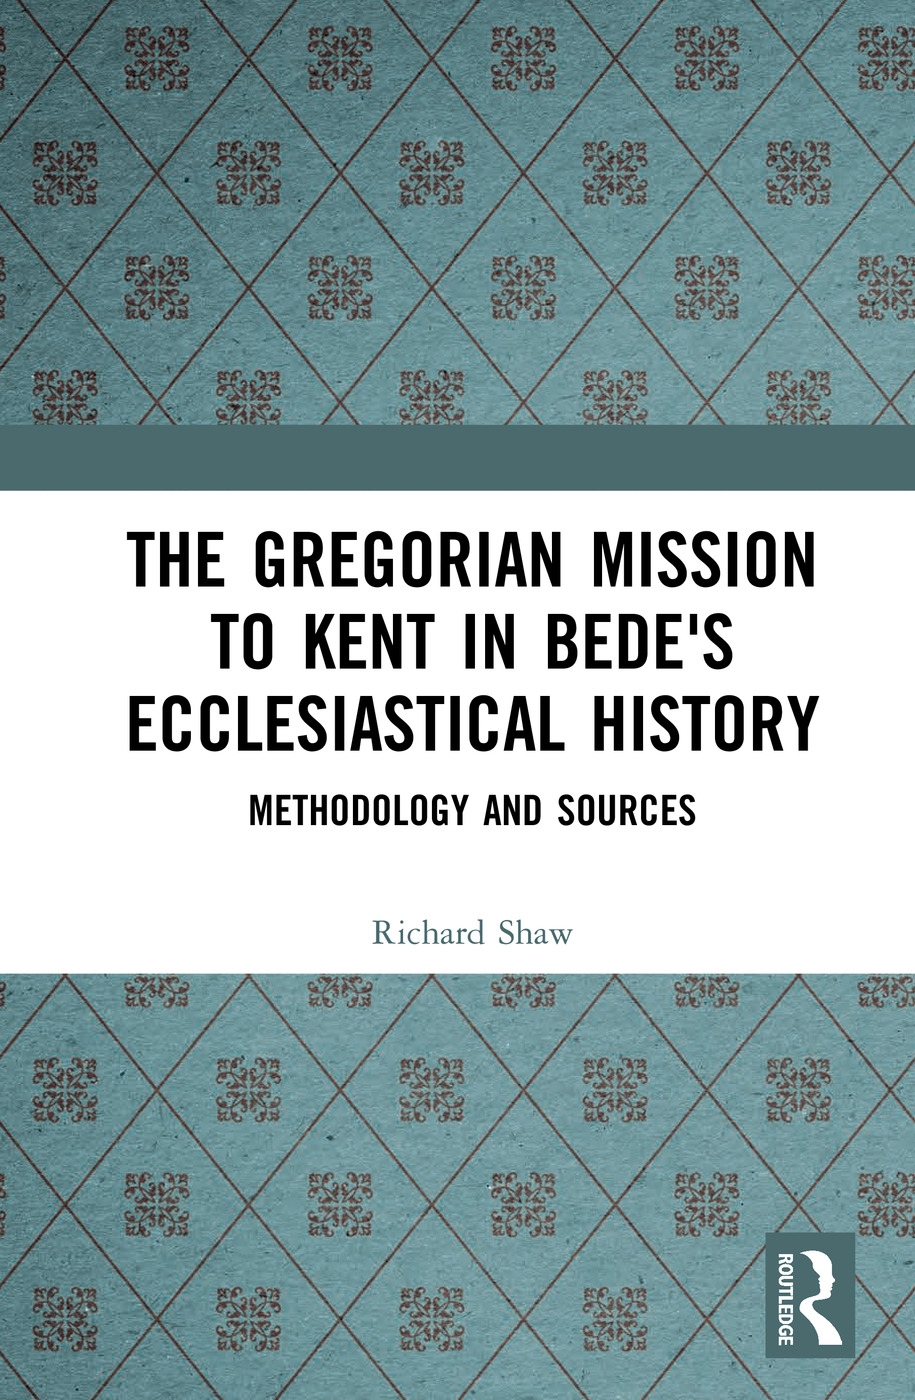 The Gregorian Mission to Kent in Bede’s Ecclesiastical History: Methodology and Sources